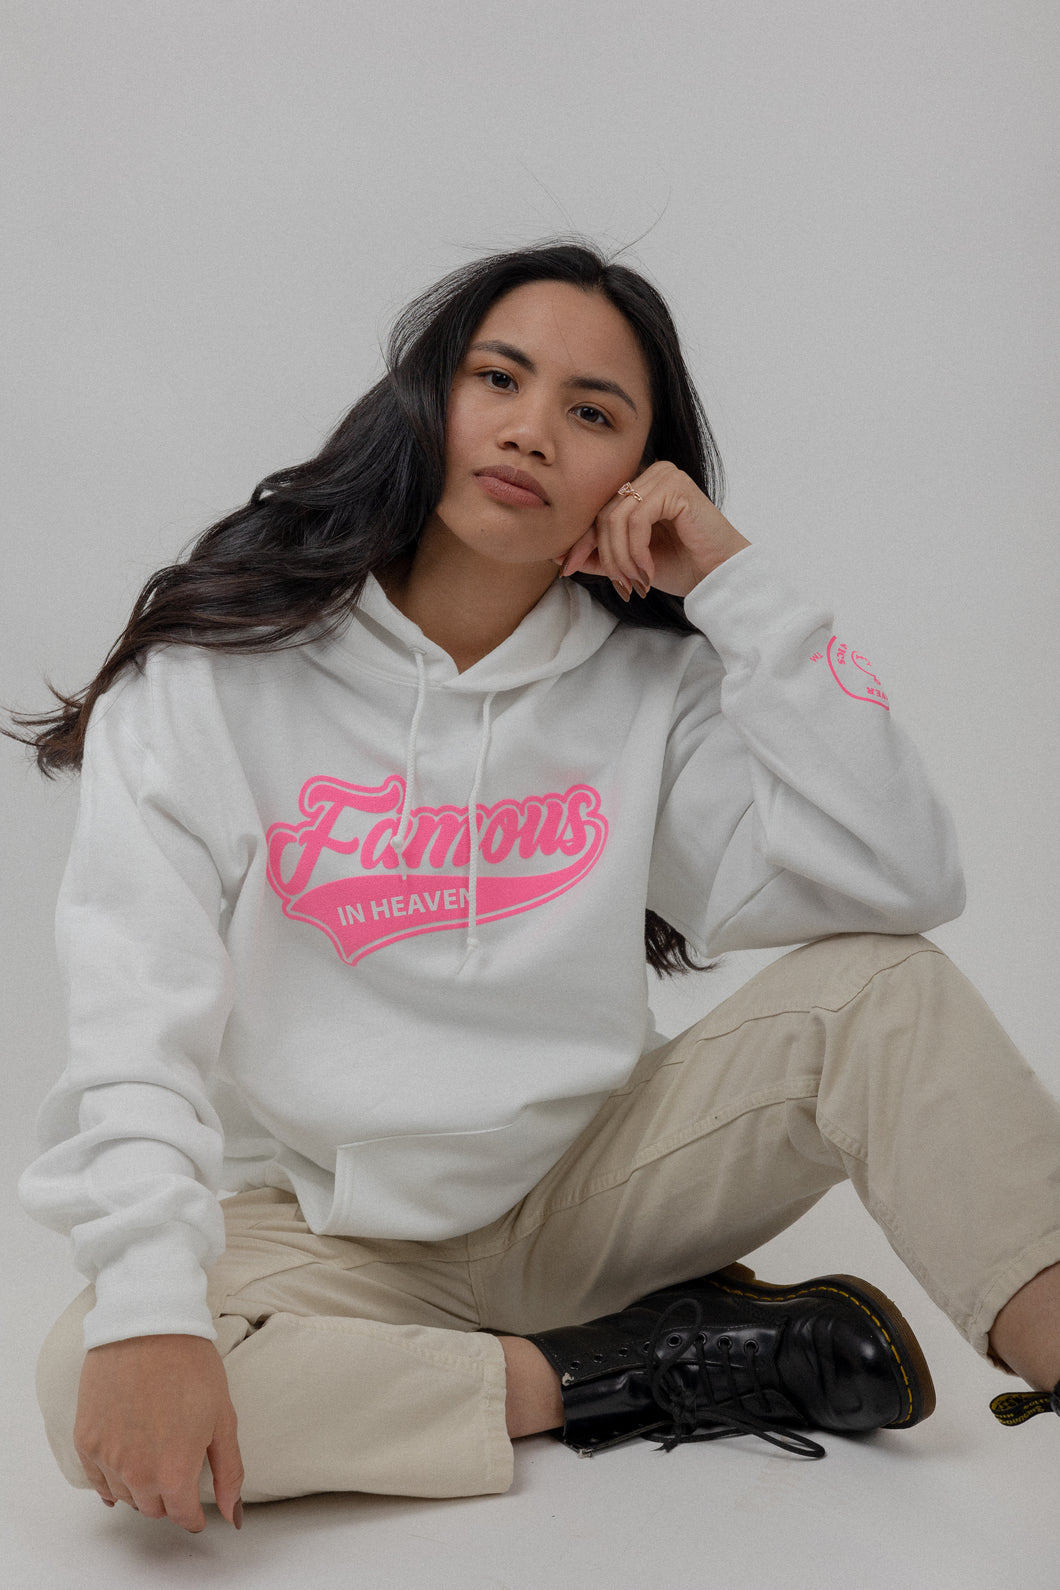 Famous in Heaven - All Star Hoodie (White/Pink)